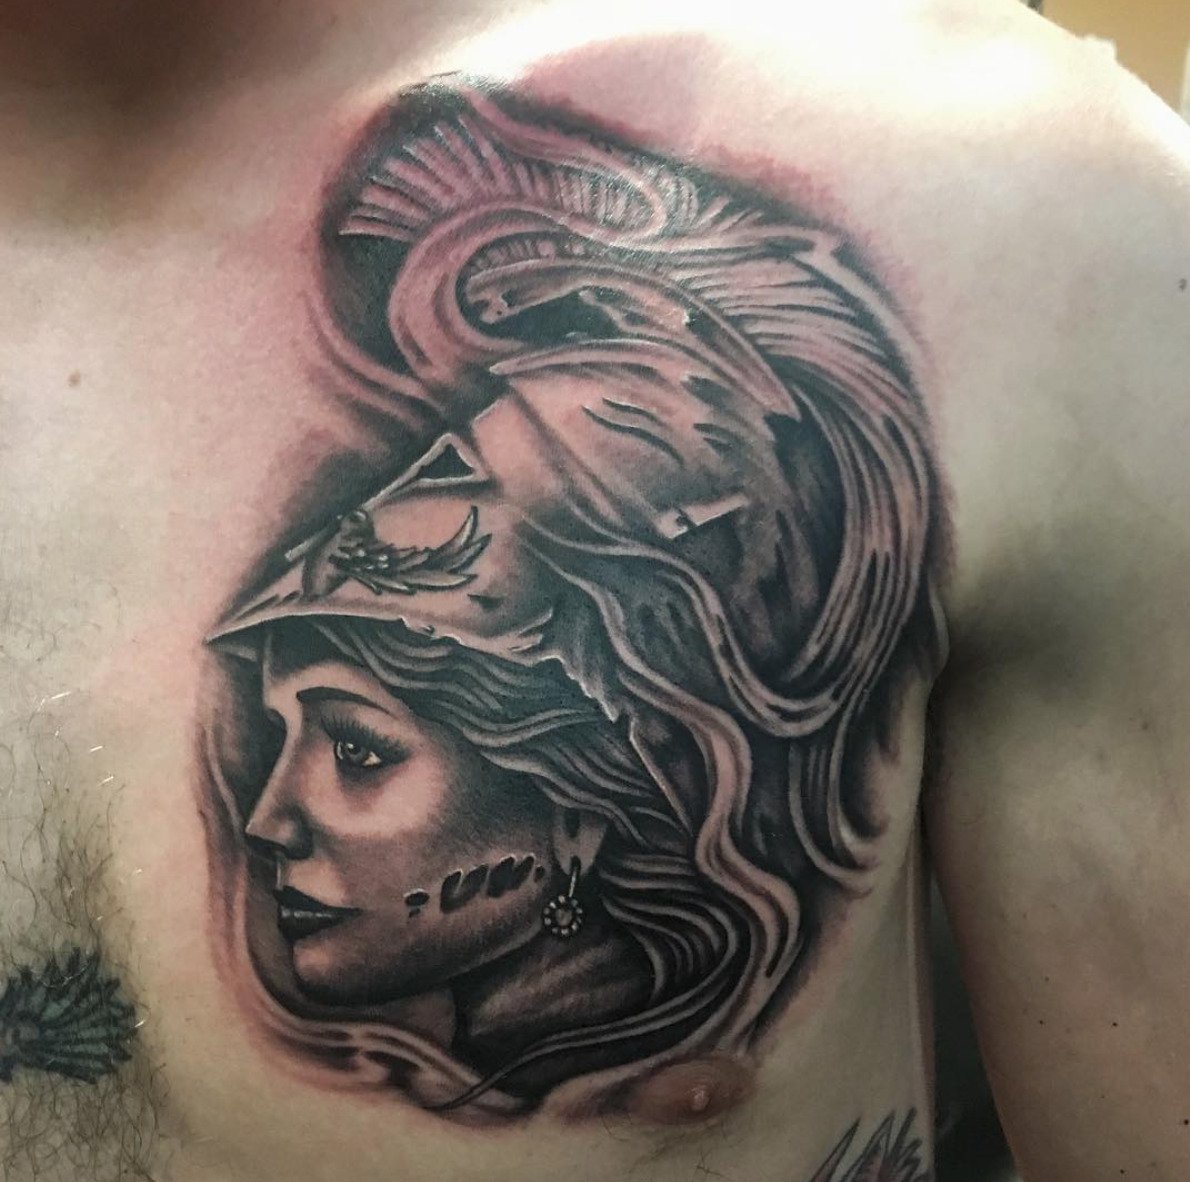 Athena Tattoo Meaning: 4 Meaningful Reasons to Get an Athena Tattoo